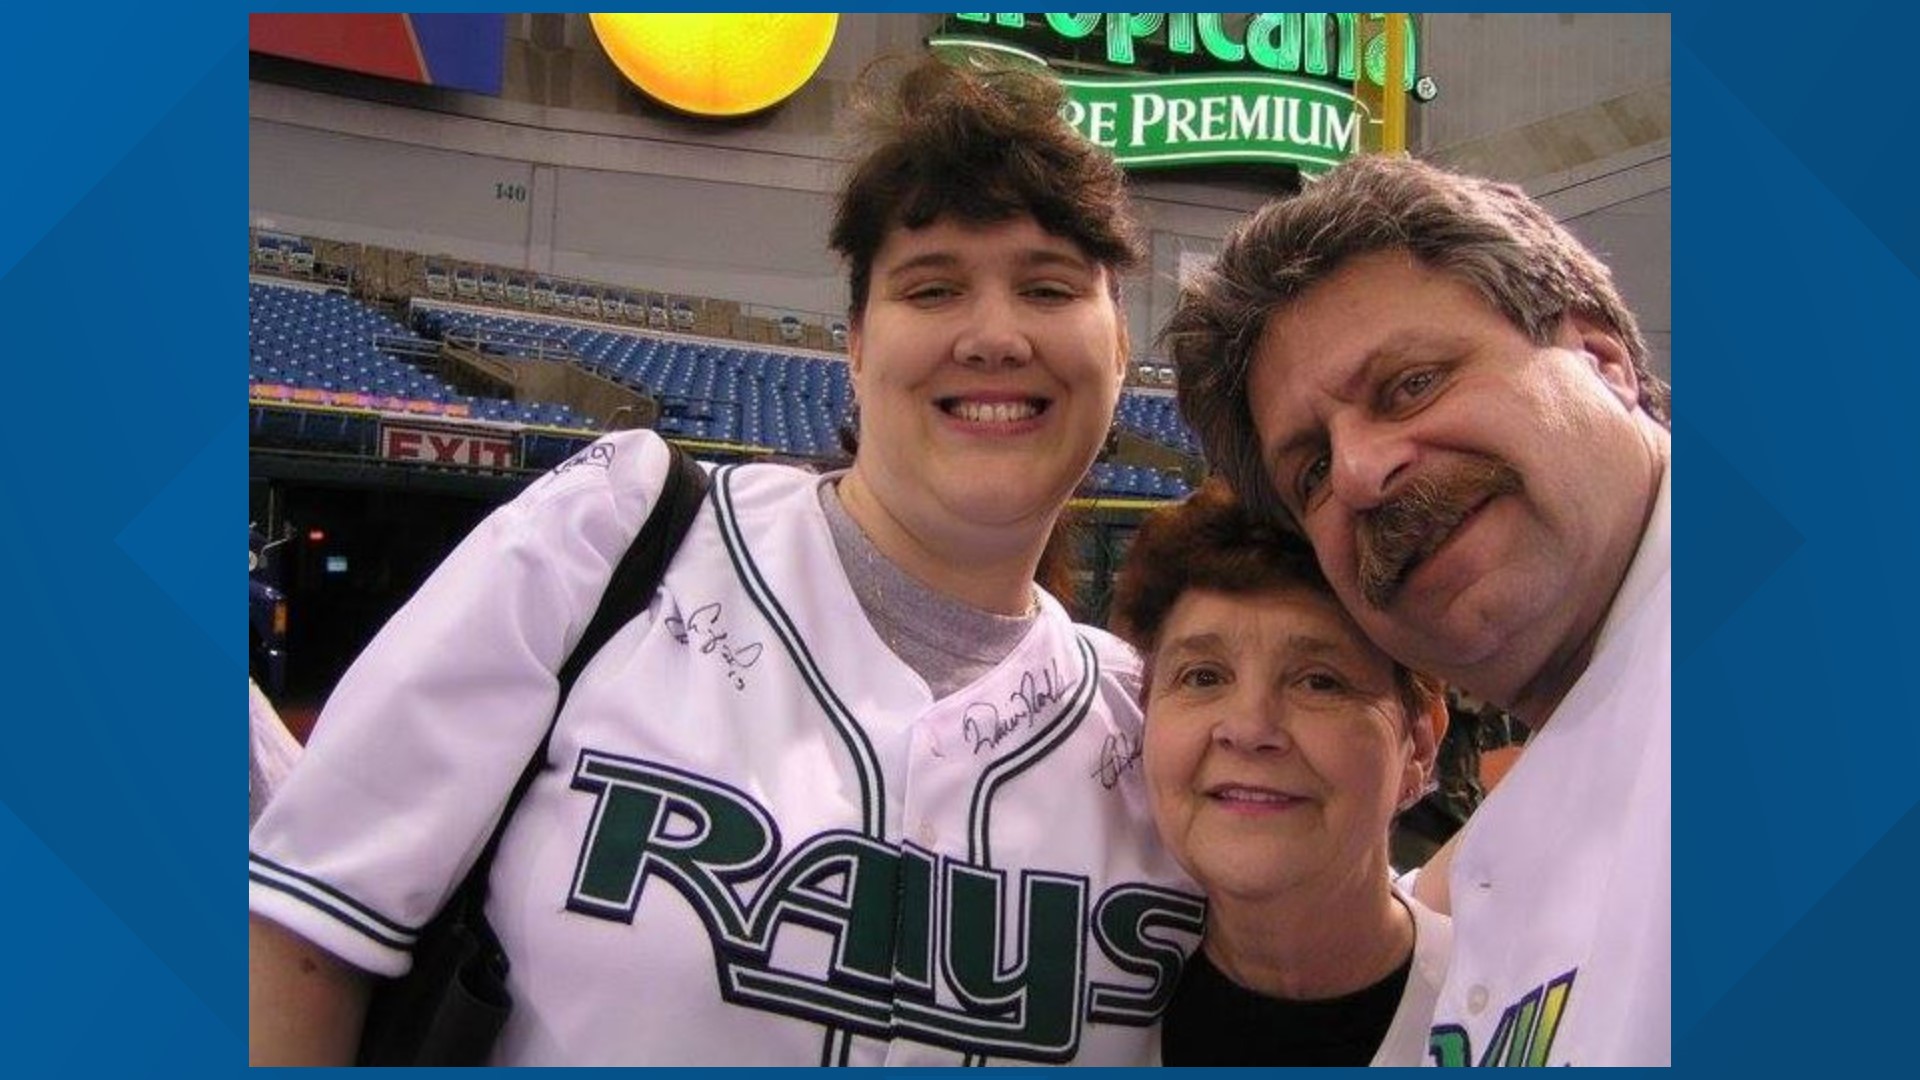 Rays super fan Billie Jo Bell has attended Opening Day games since 1998 but pandemic safety rules prohibit fans from attending this year.